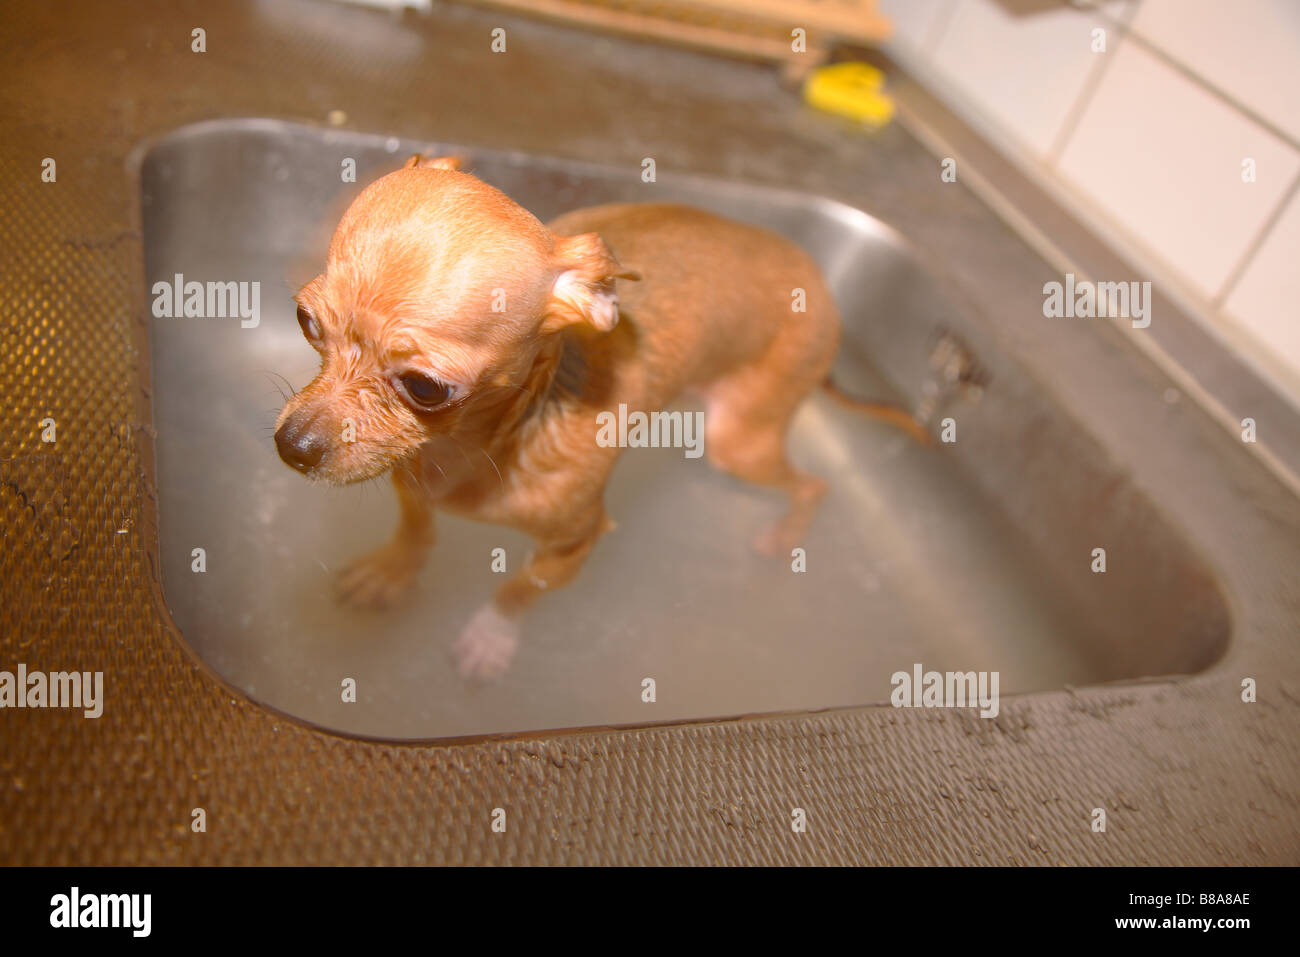 Le nettoyage, le lavage chien chihuahua chiwawa Banque D'Images